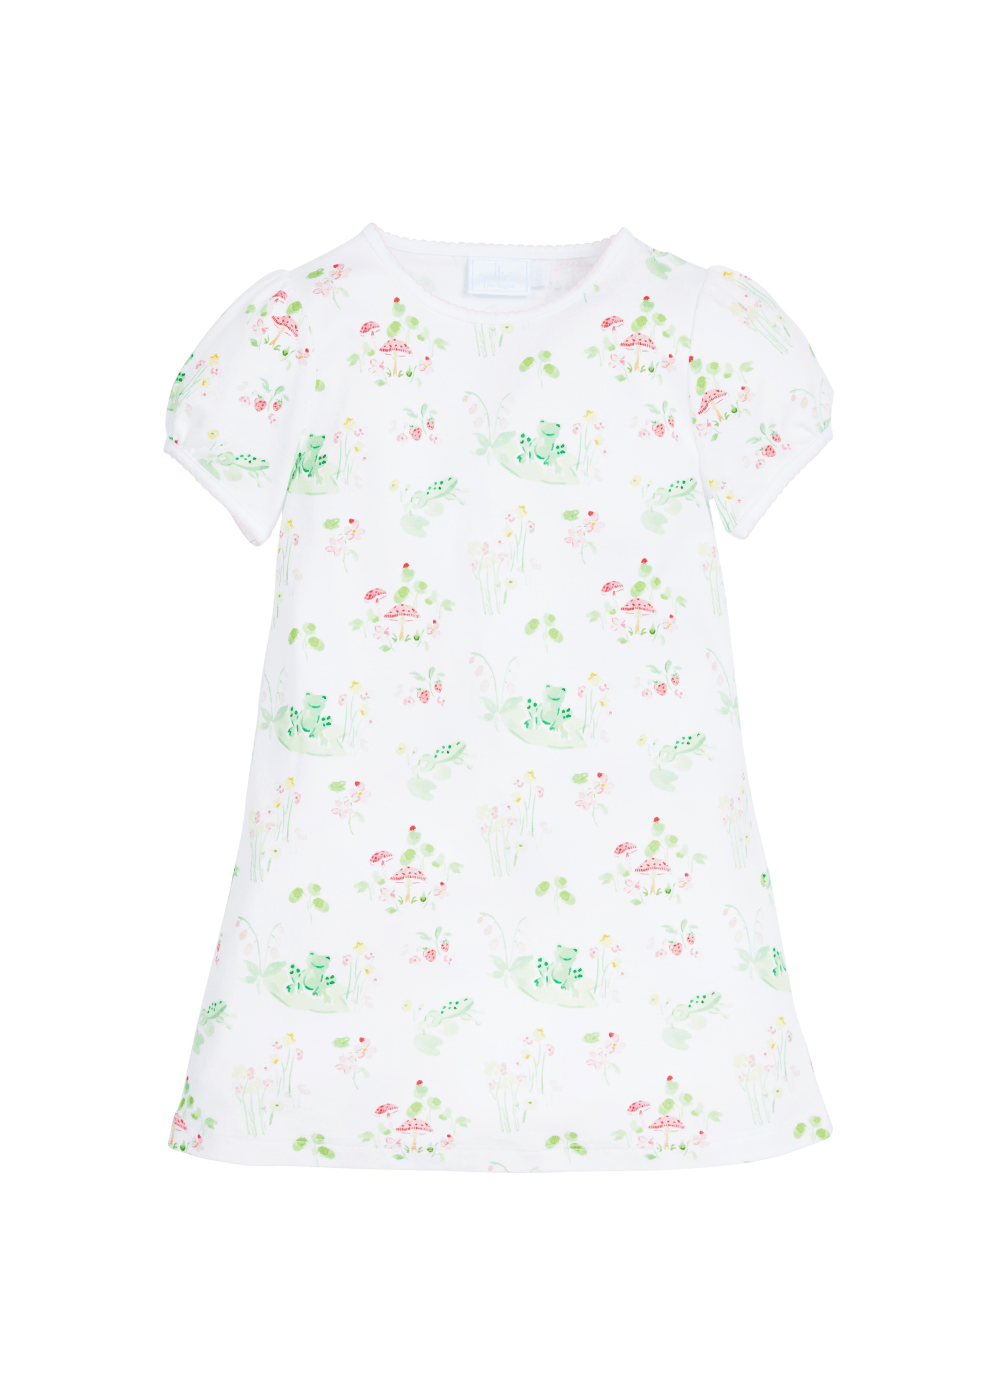 seguridadindustrialcr girl's printed t-shirt dress with watercolor frog design